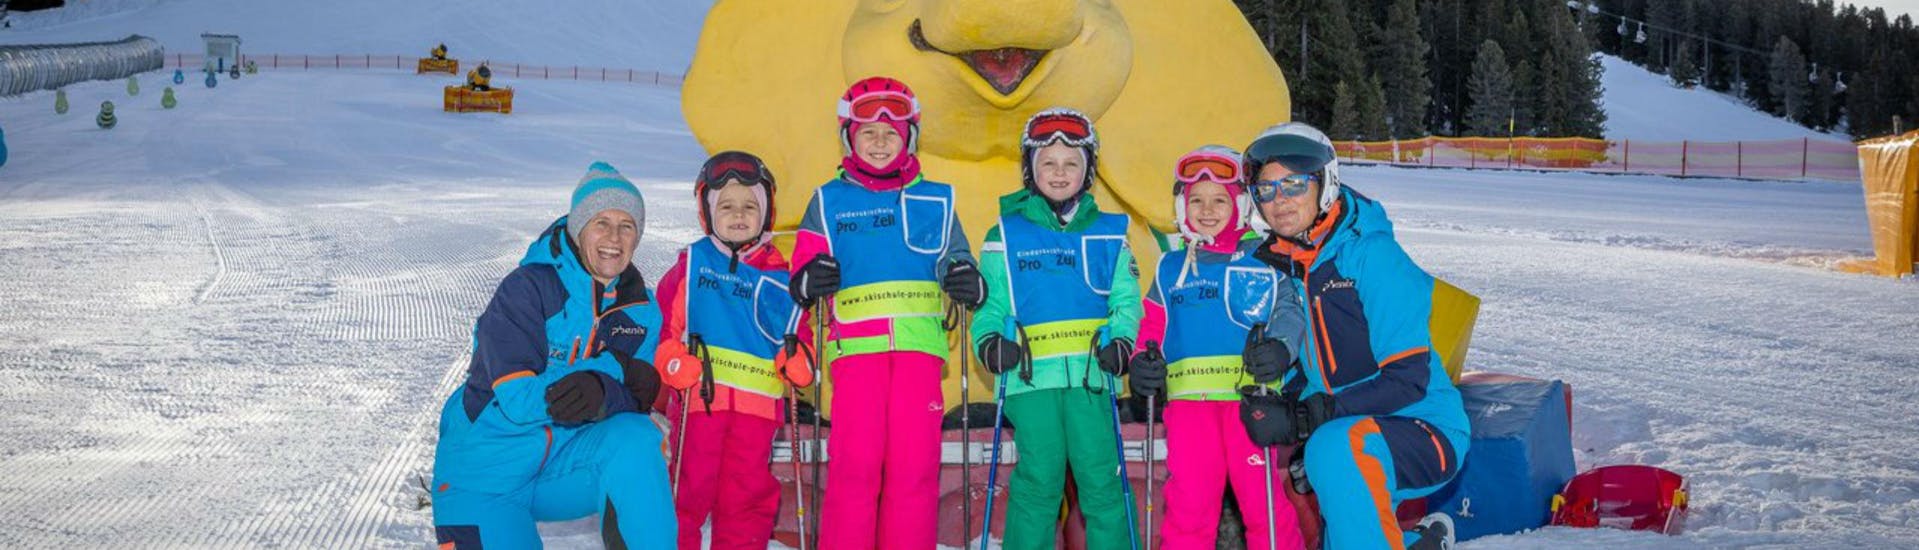 A group of children and their two ski instructors from the ski school Skischule Pro Zell in Zell am Ziller are posing for a photo in the Kinderland area during their Kids Ski Lessons "Bambini" (3-5 years).